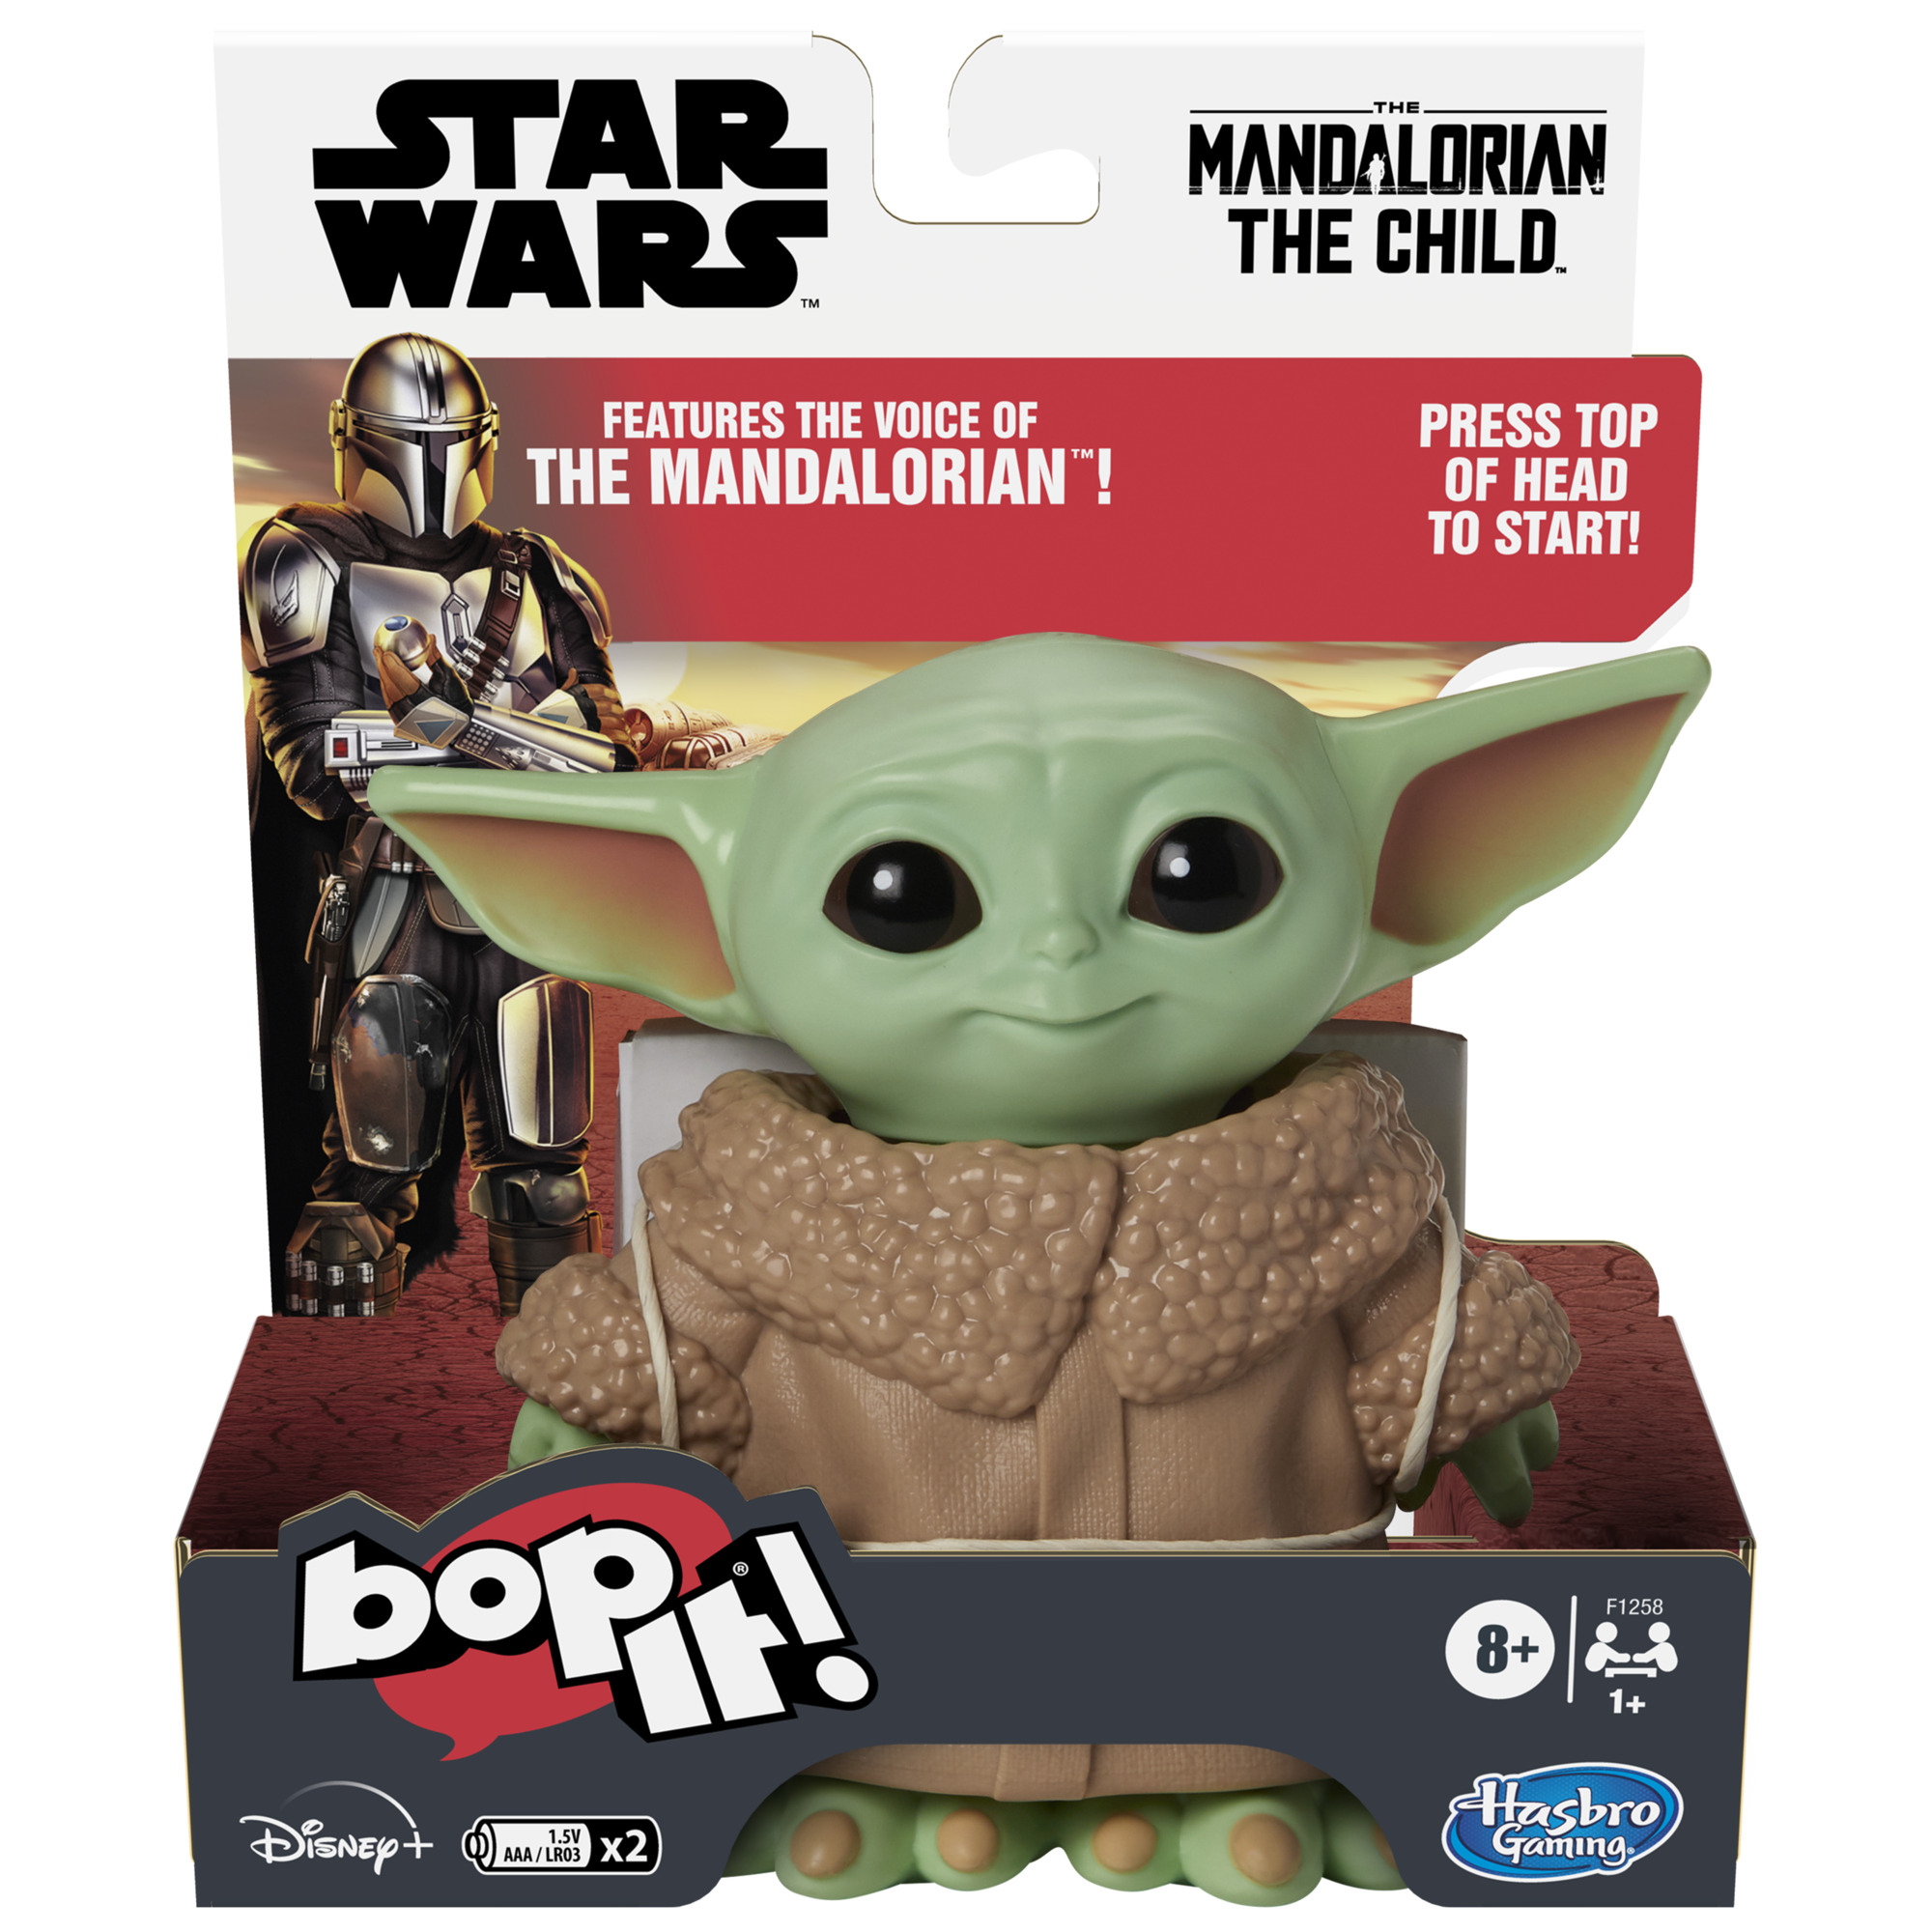 Bop It! Star Wars The Mandalorian The Child Edition Electronic Game for Kids and Family Ages 8 and Up, 1+ Player (2 Pack) - image 4 of 8